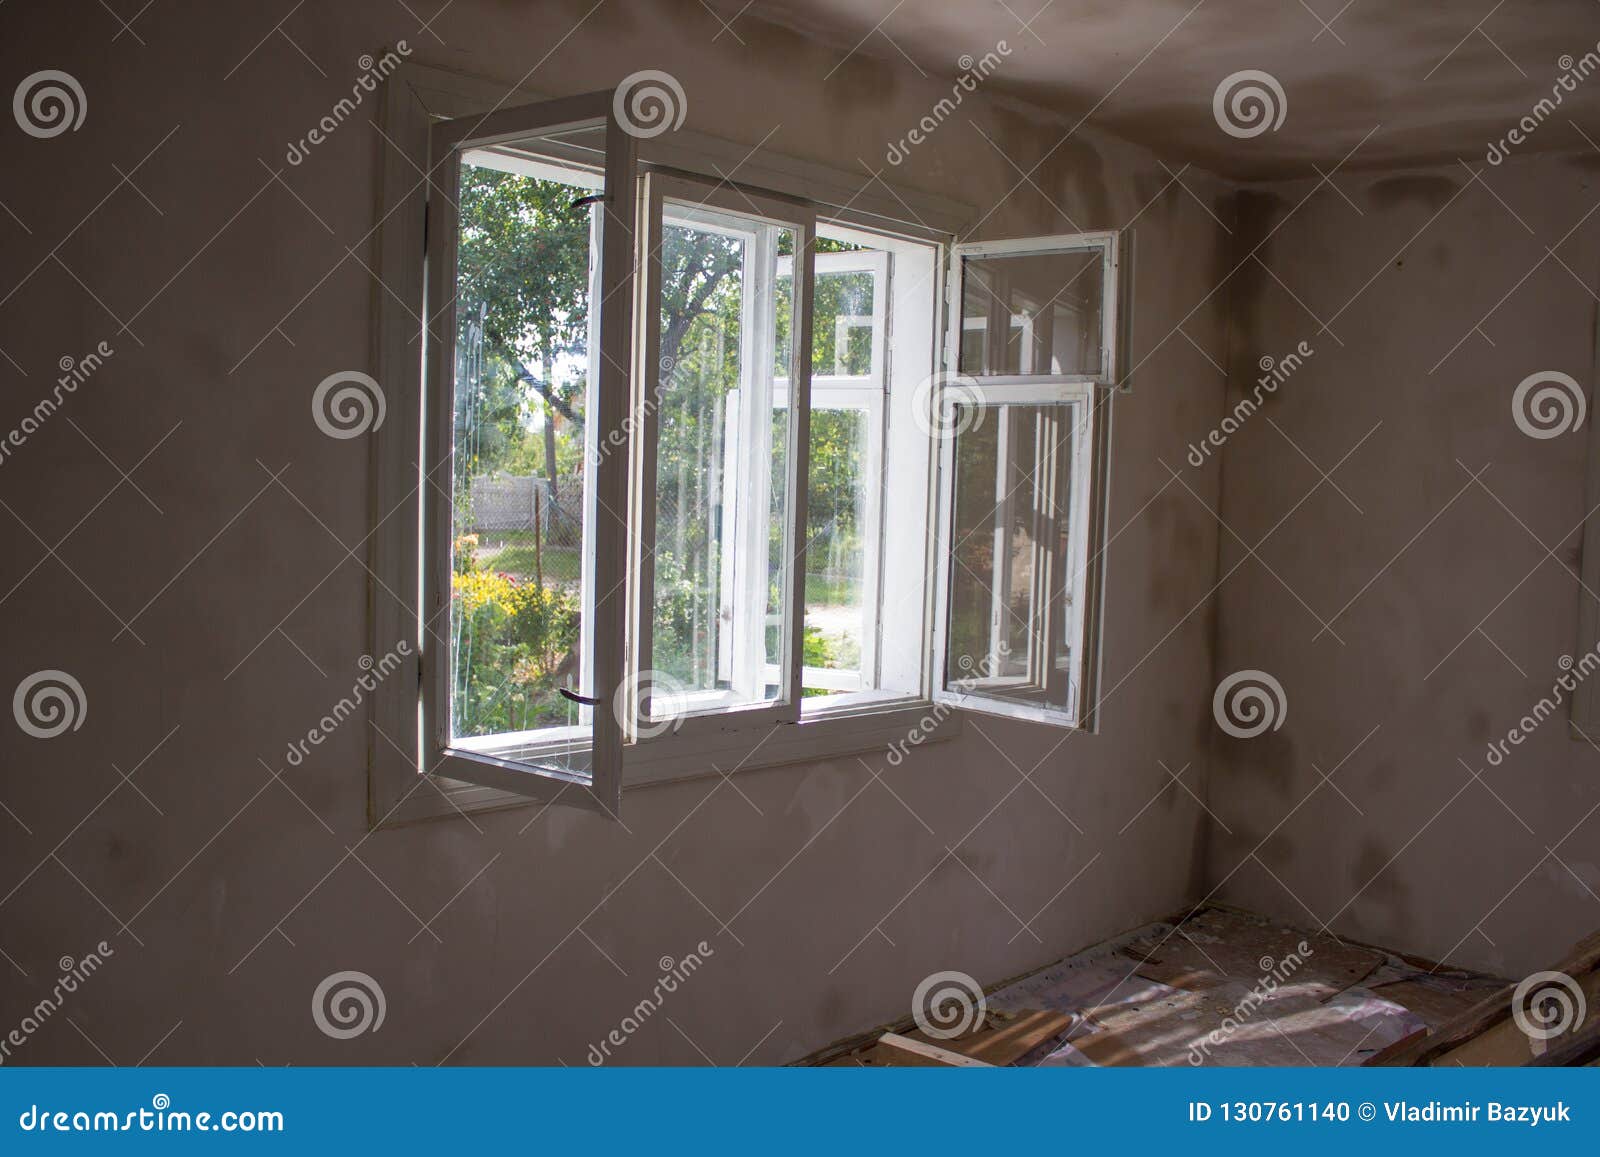 open window repair in the room,ventilate the room after repair with an open window